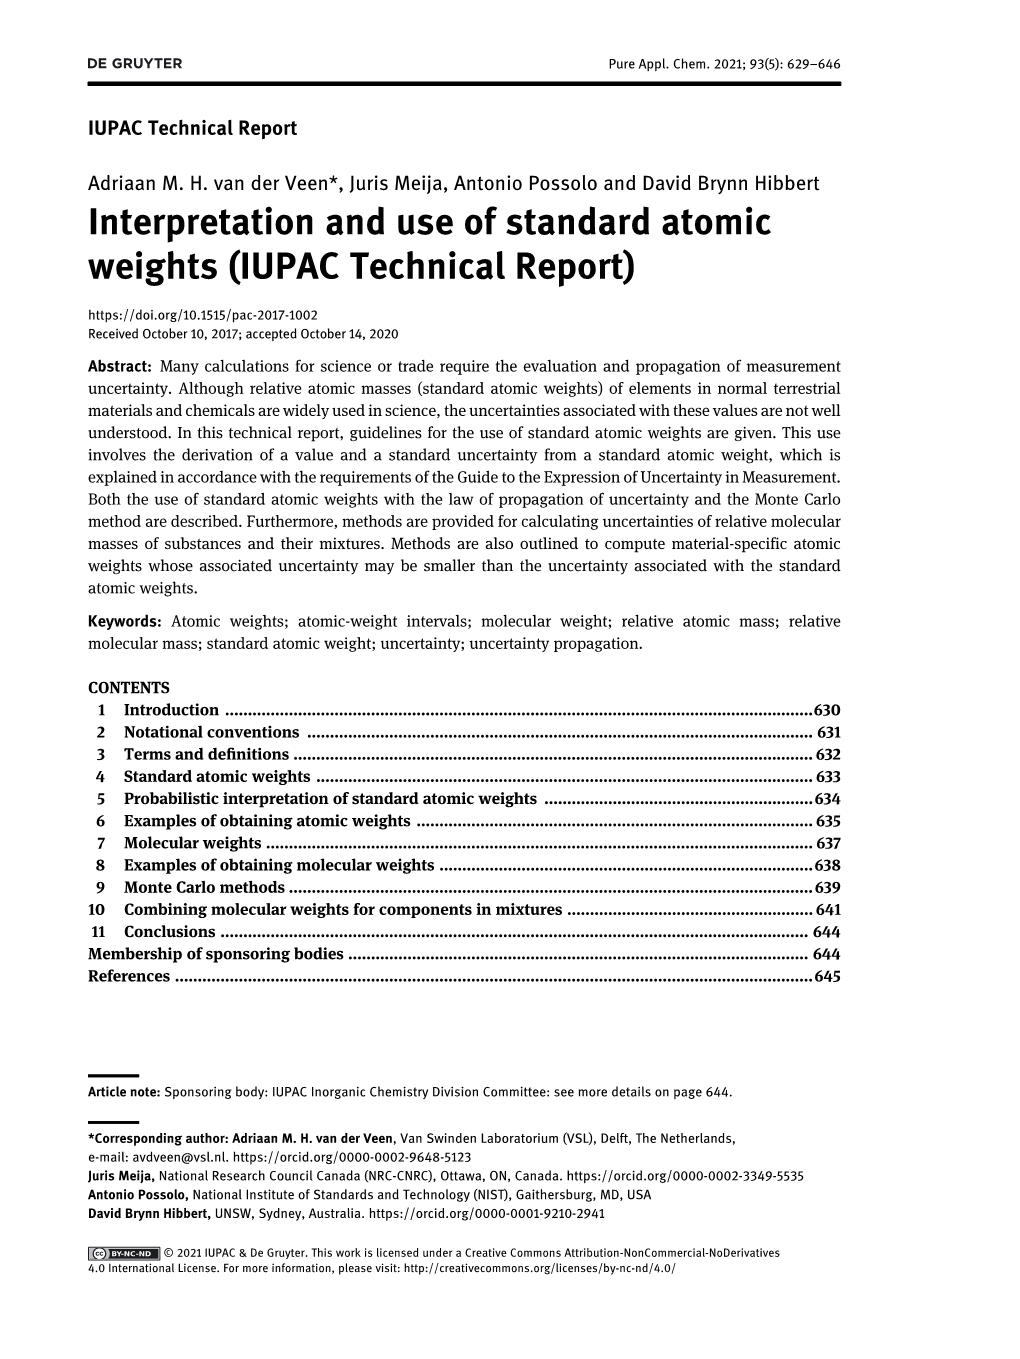 Interpretation and Use of Standard Atomic Weights (IUPAC Technical Report) Received October 10, 2017; Accepted October 14, 2020